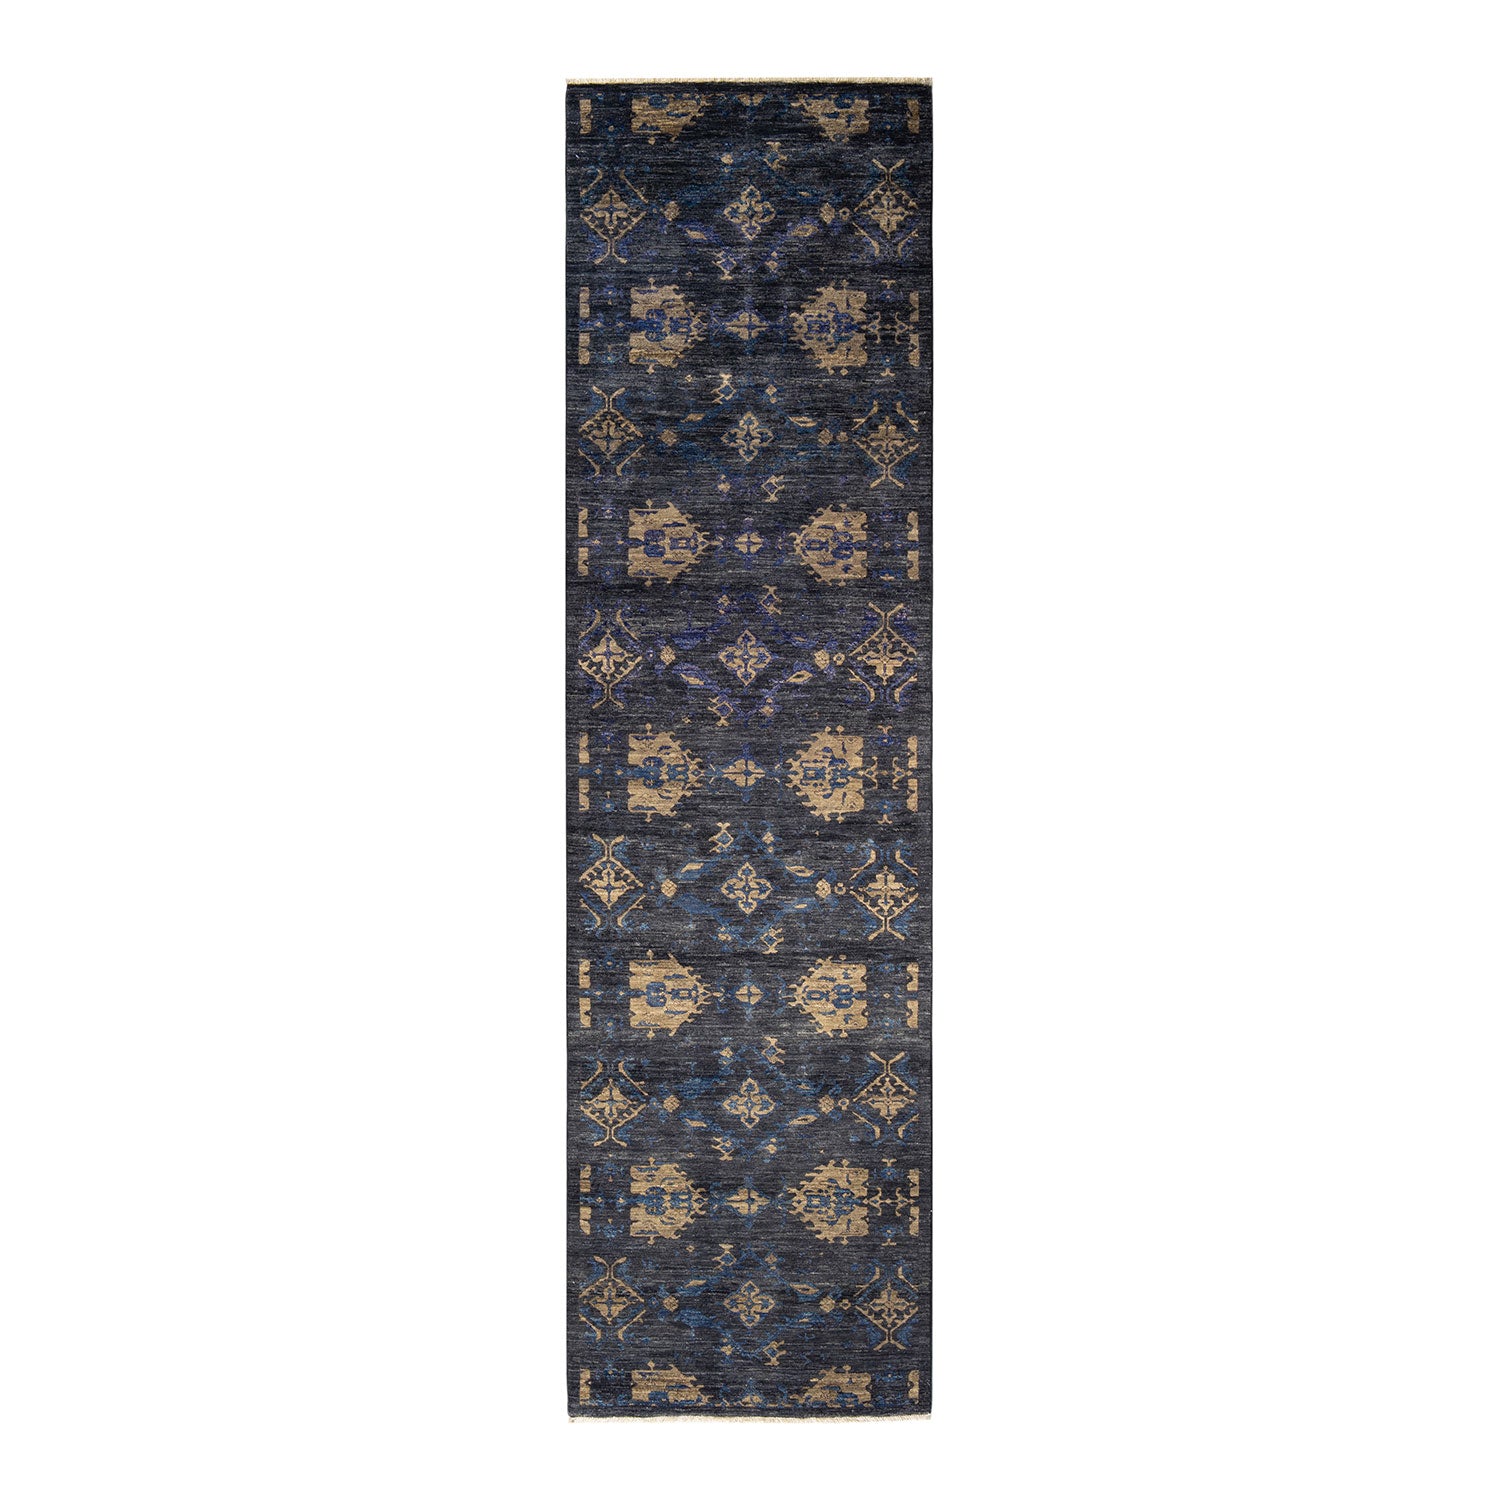 An ornate rectangular rug with repeating geometric and floral motifs.